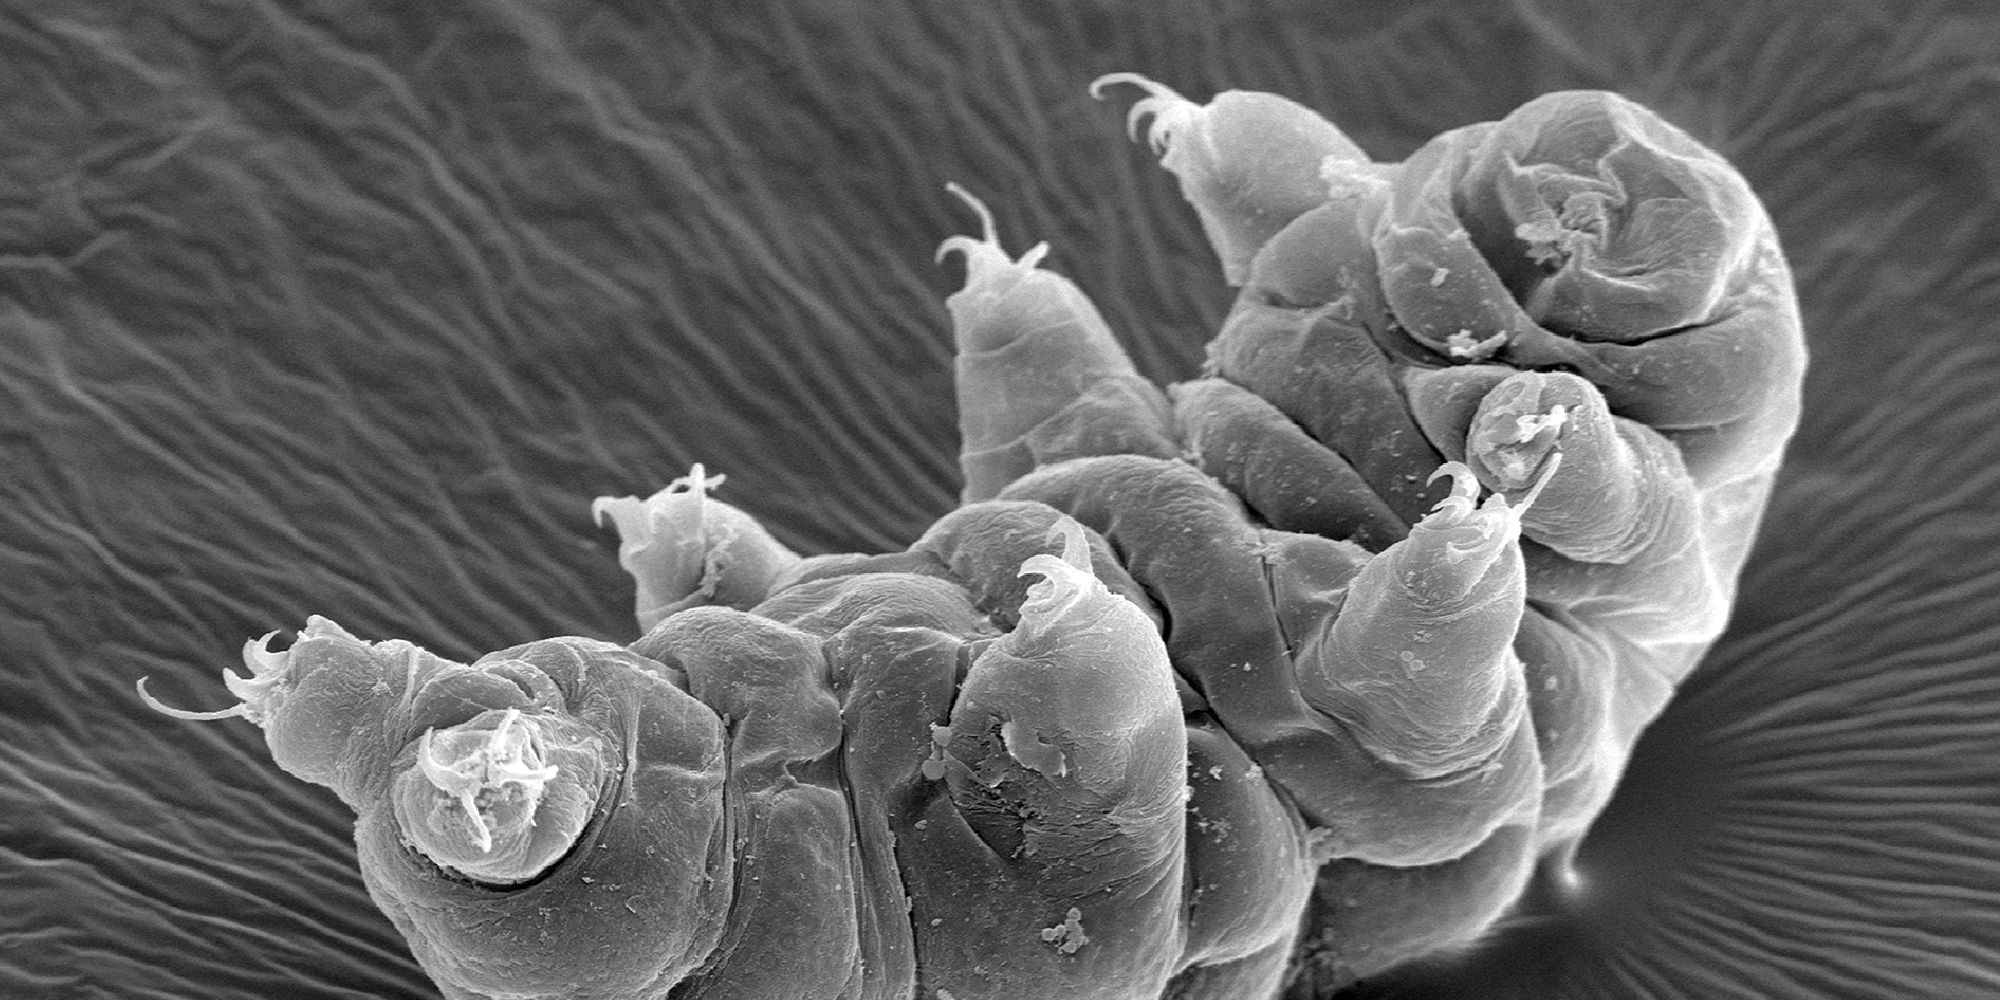 A black and white microscopic image of a tardigrade